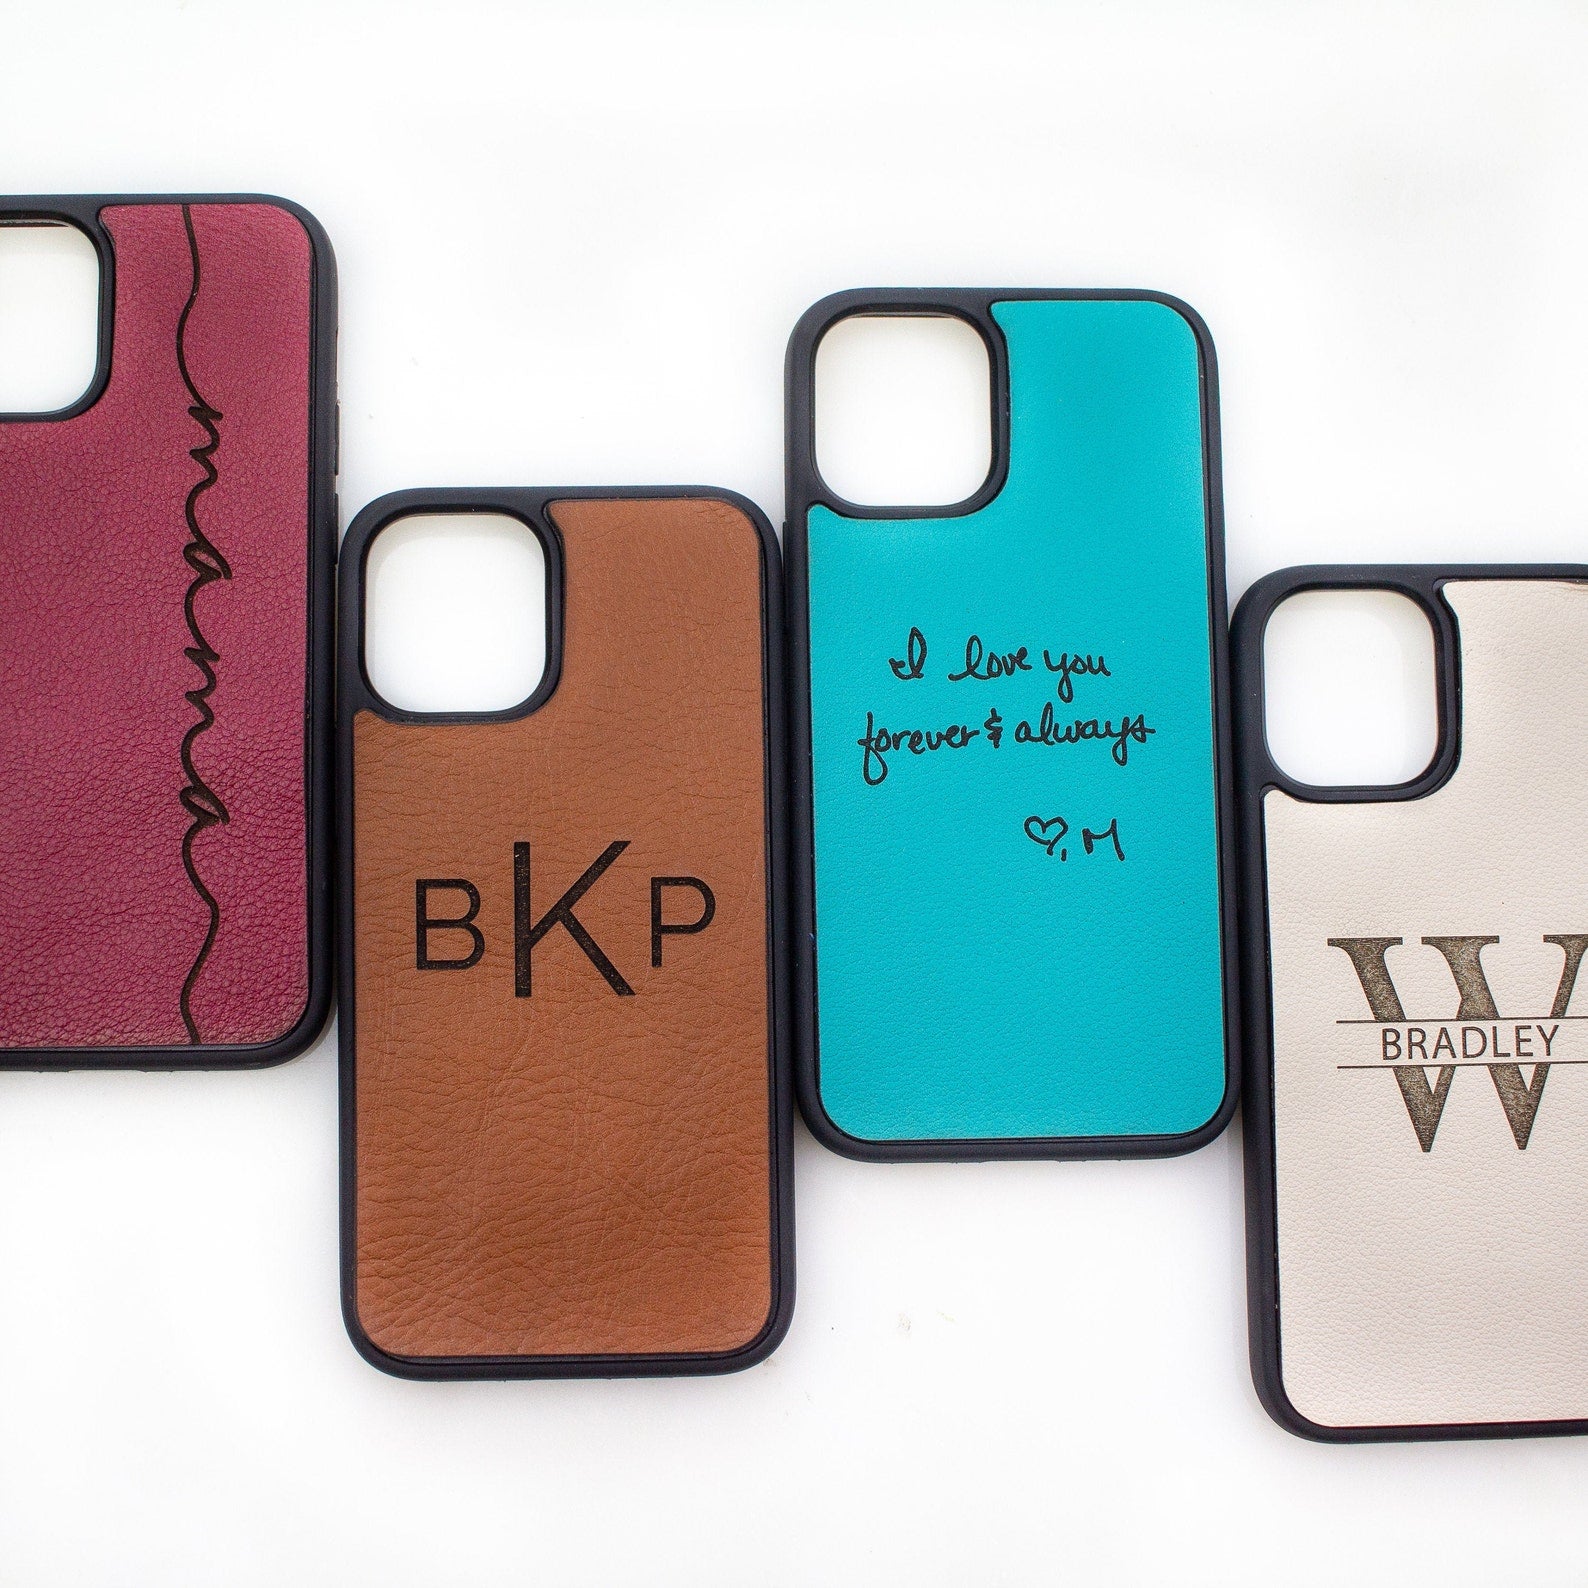 Leather Phone Cases, Iphone Case